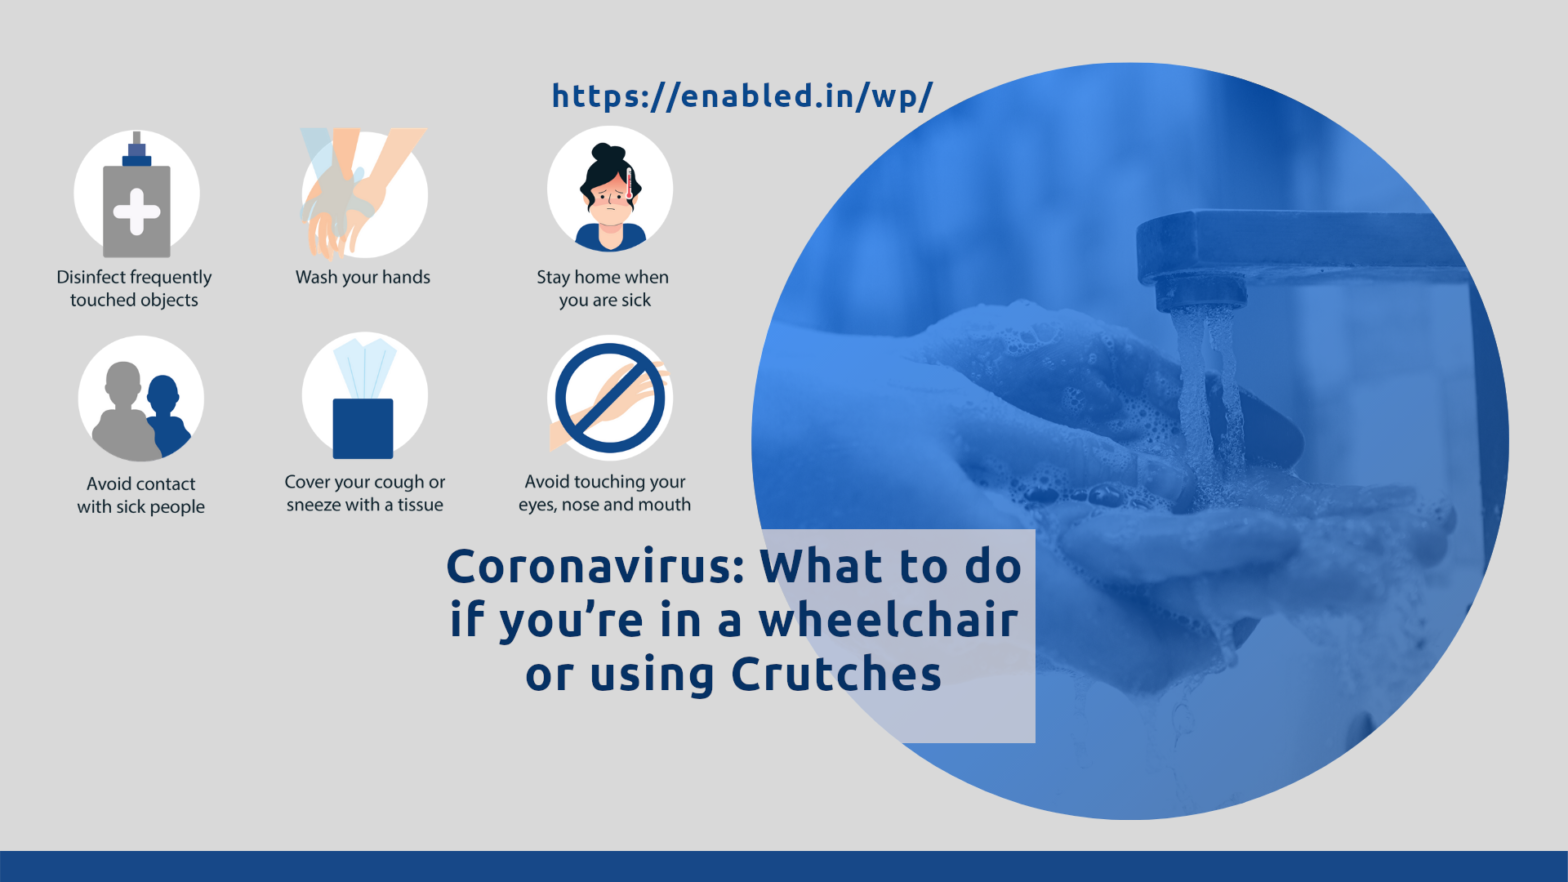 Coronavirus: What to do if you’re in a wheelchair or using Crutches